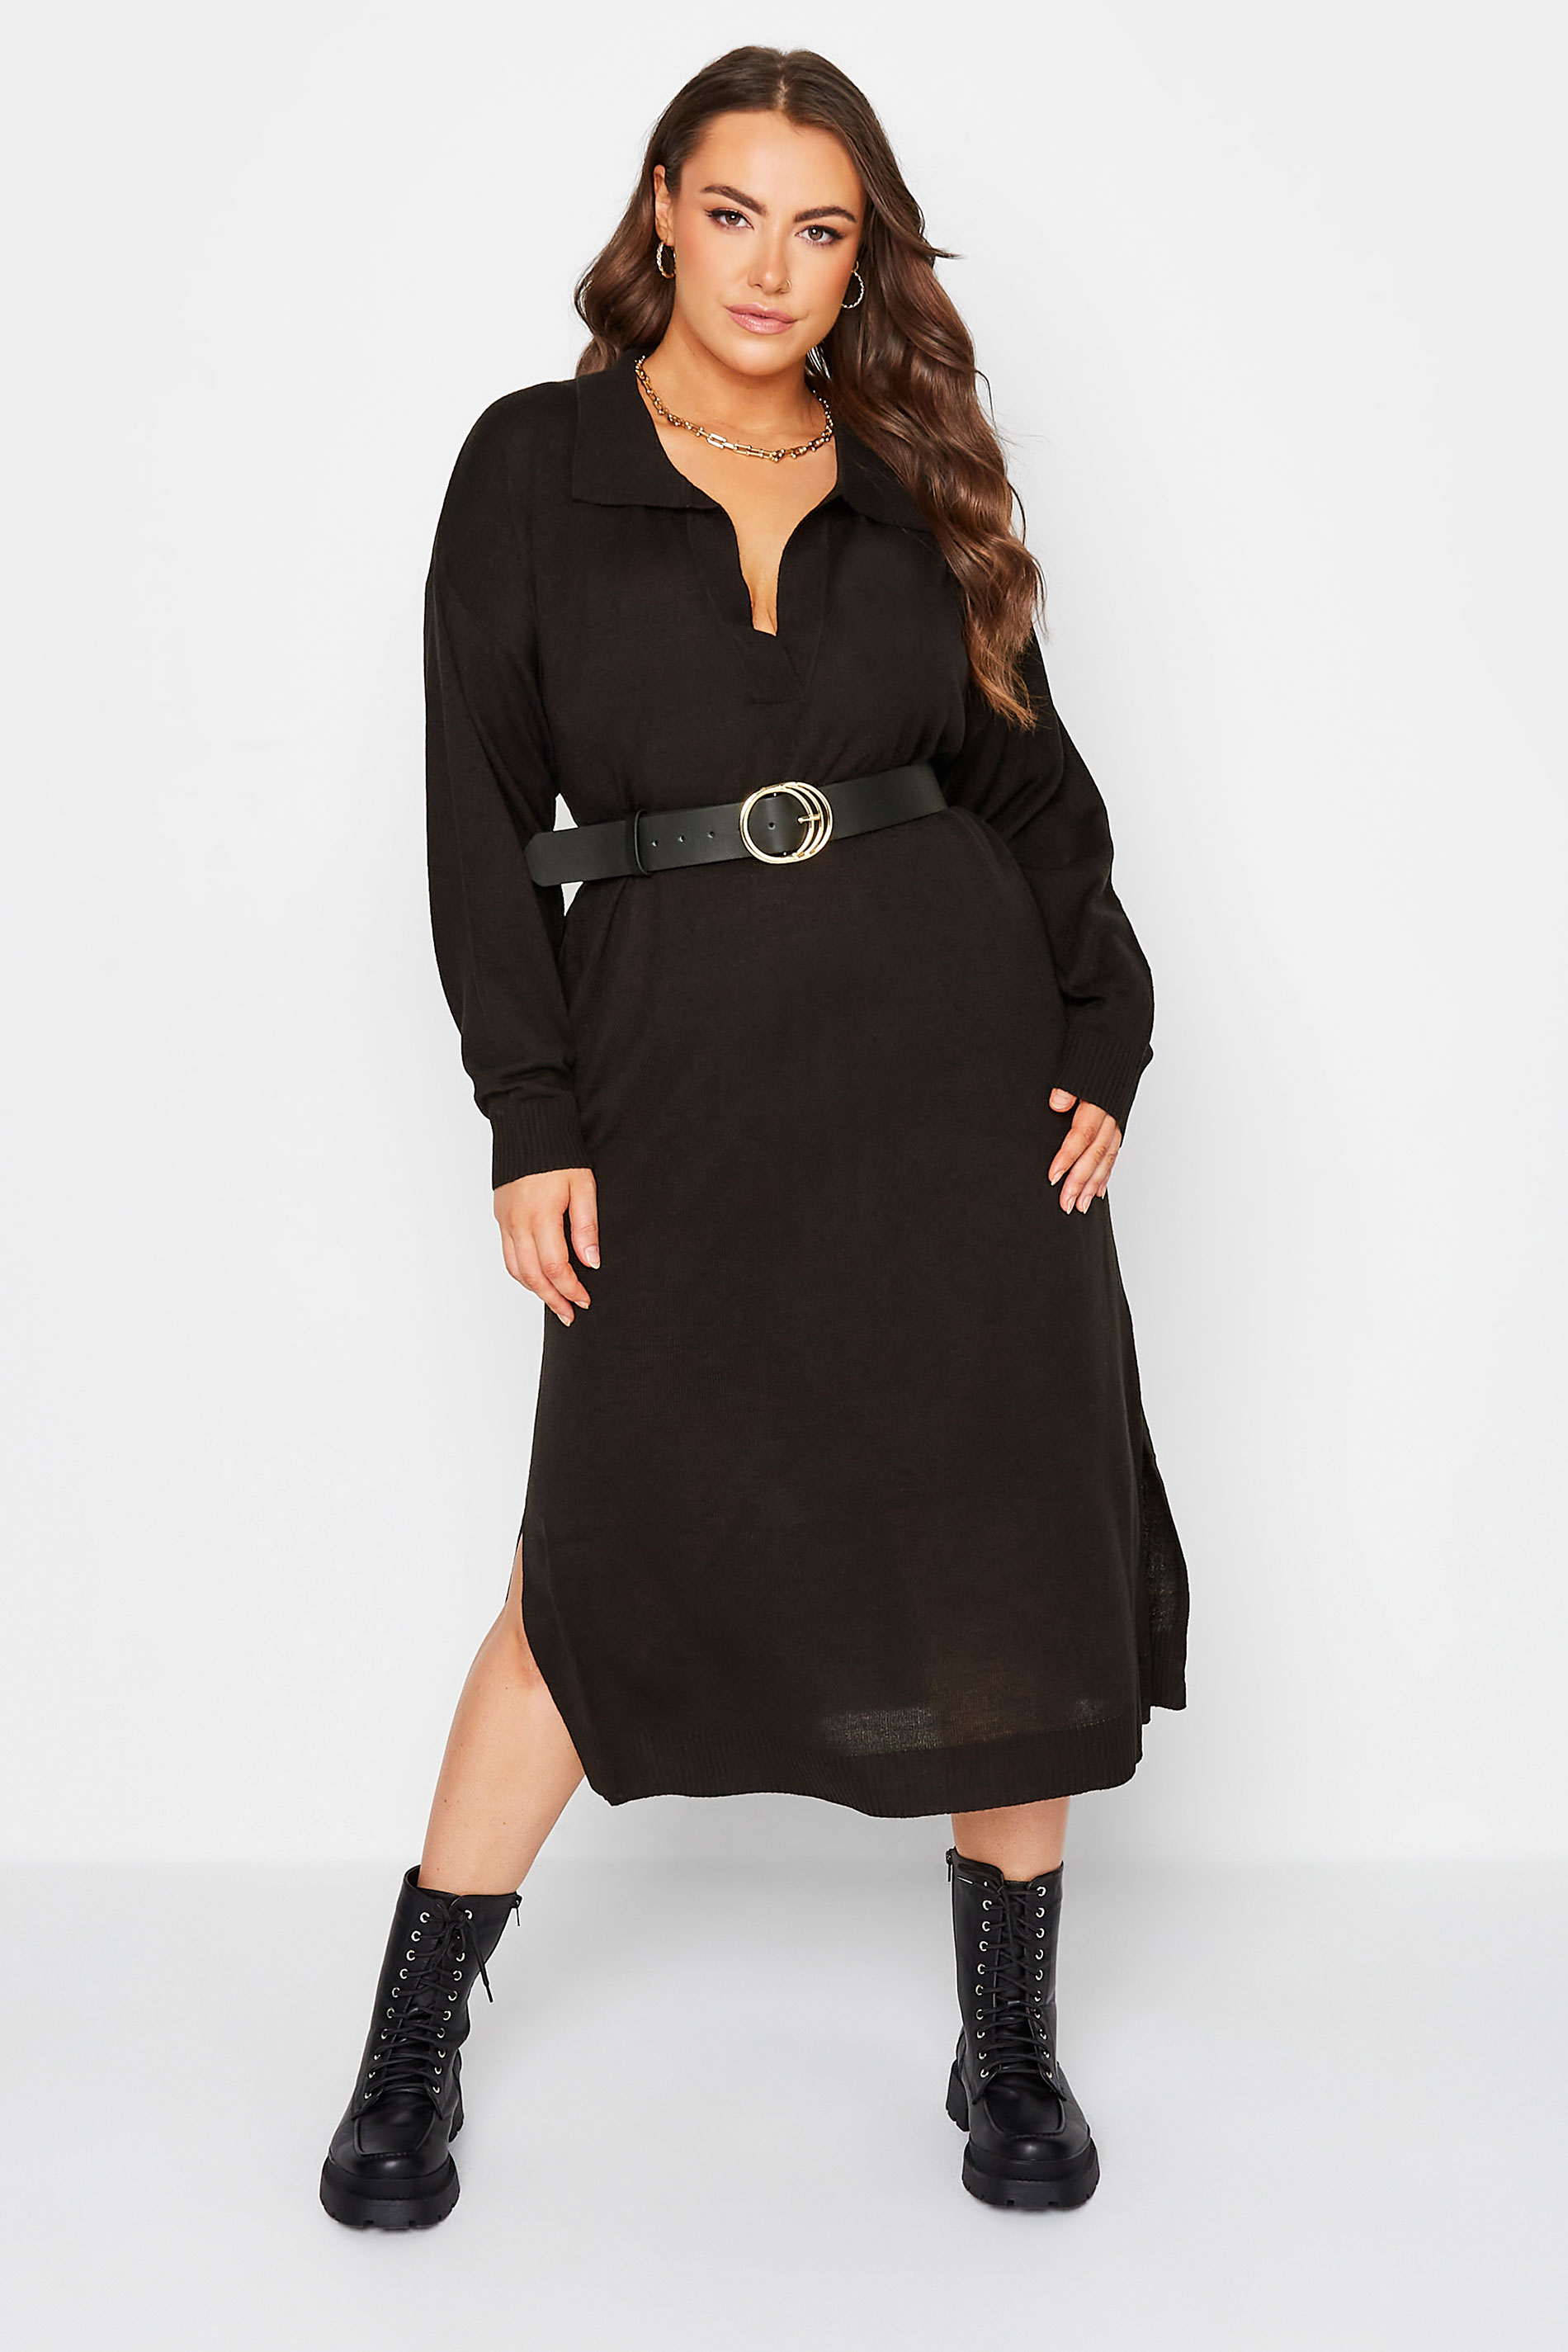 Plus Size Black Open Collar Knitted Jumper Dress | Yours Clothing 1